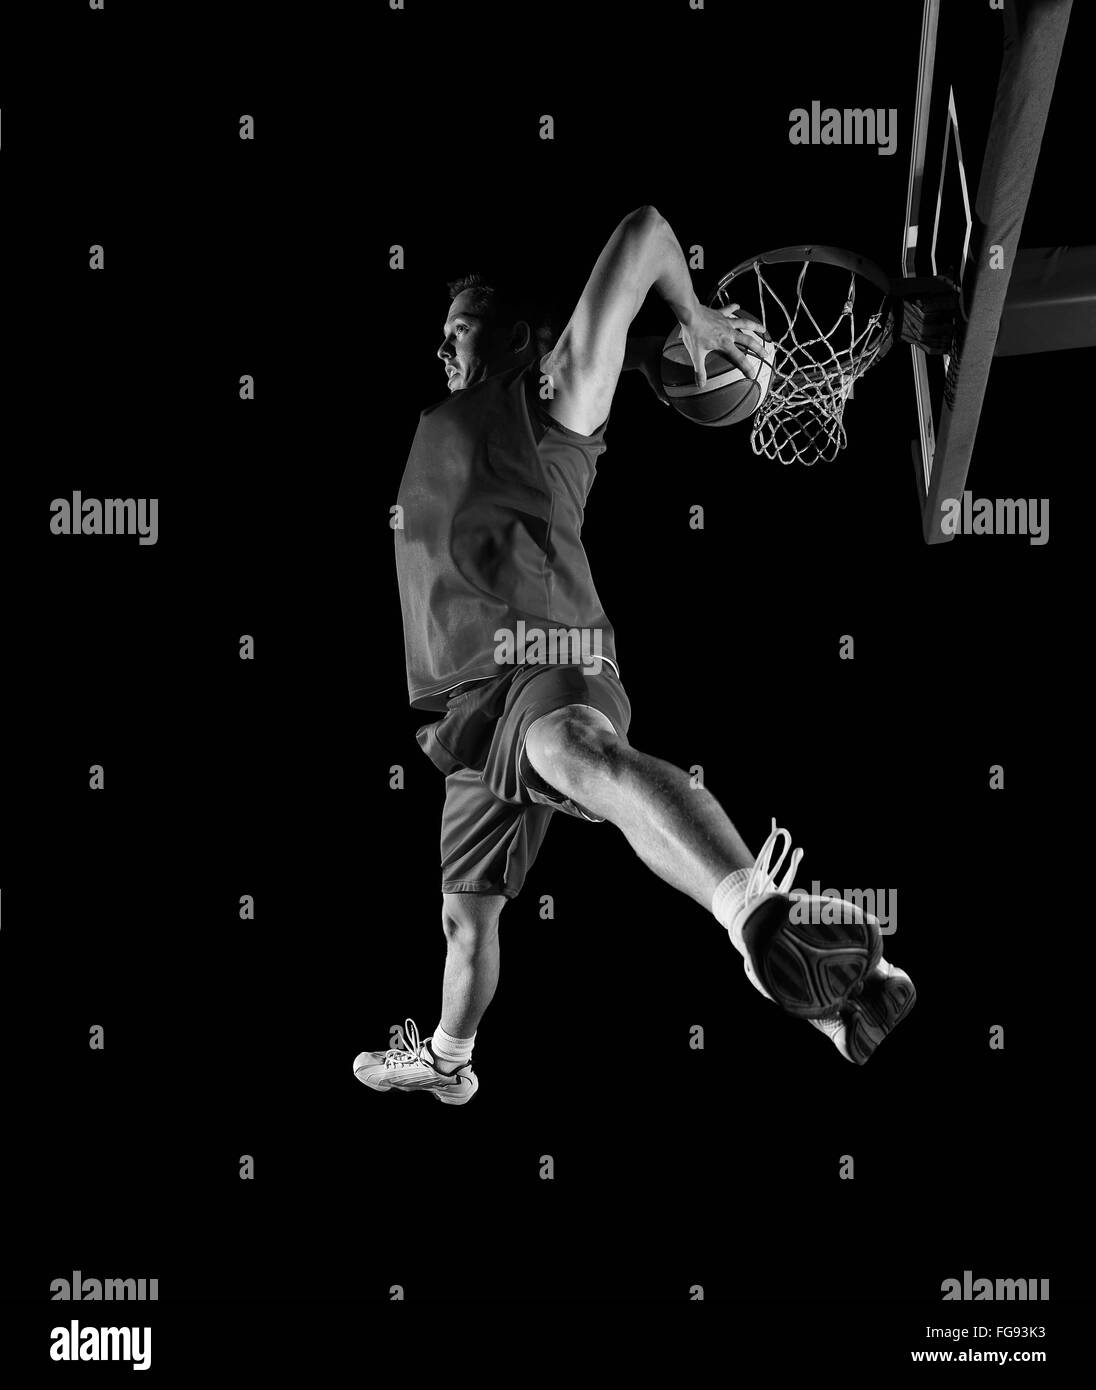 basketball players wallpapers white